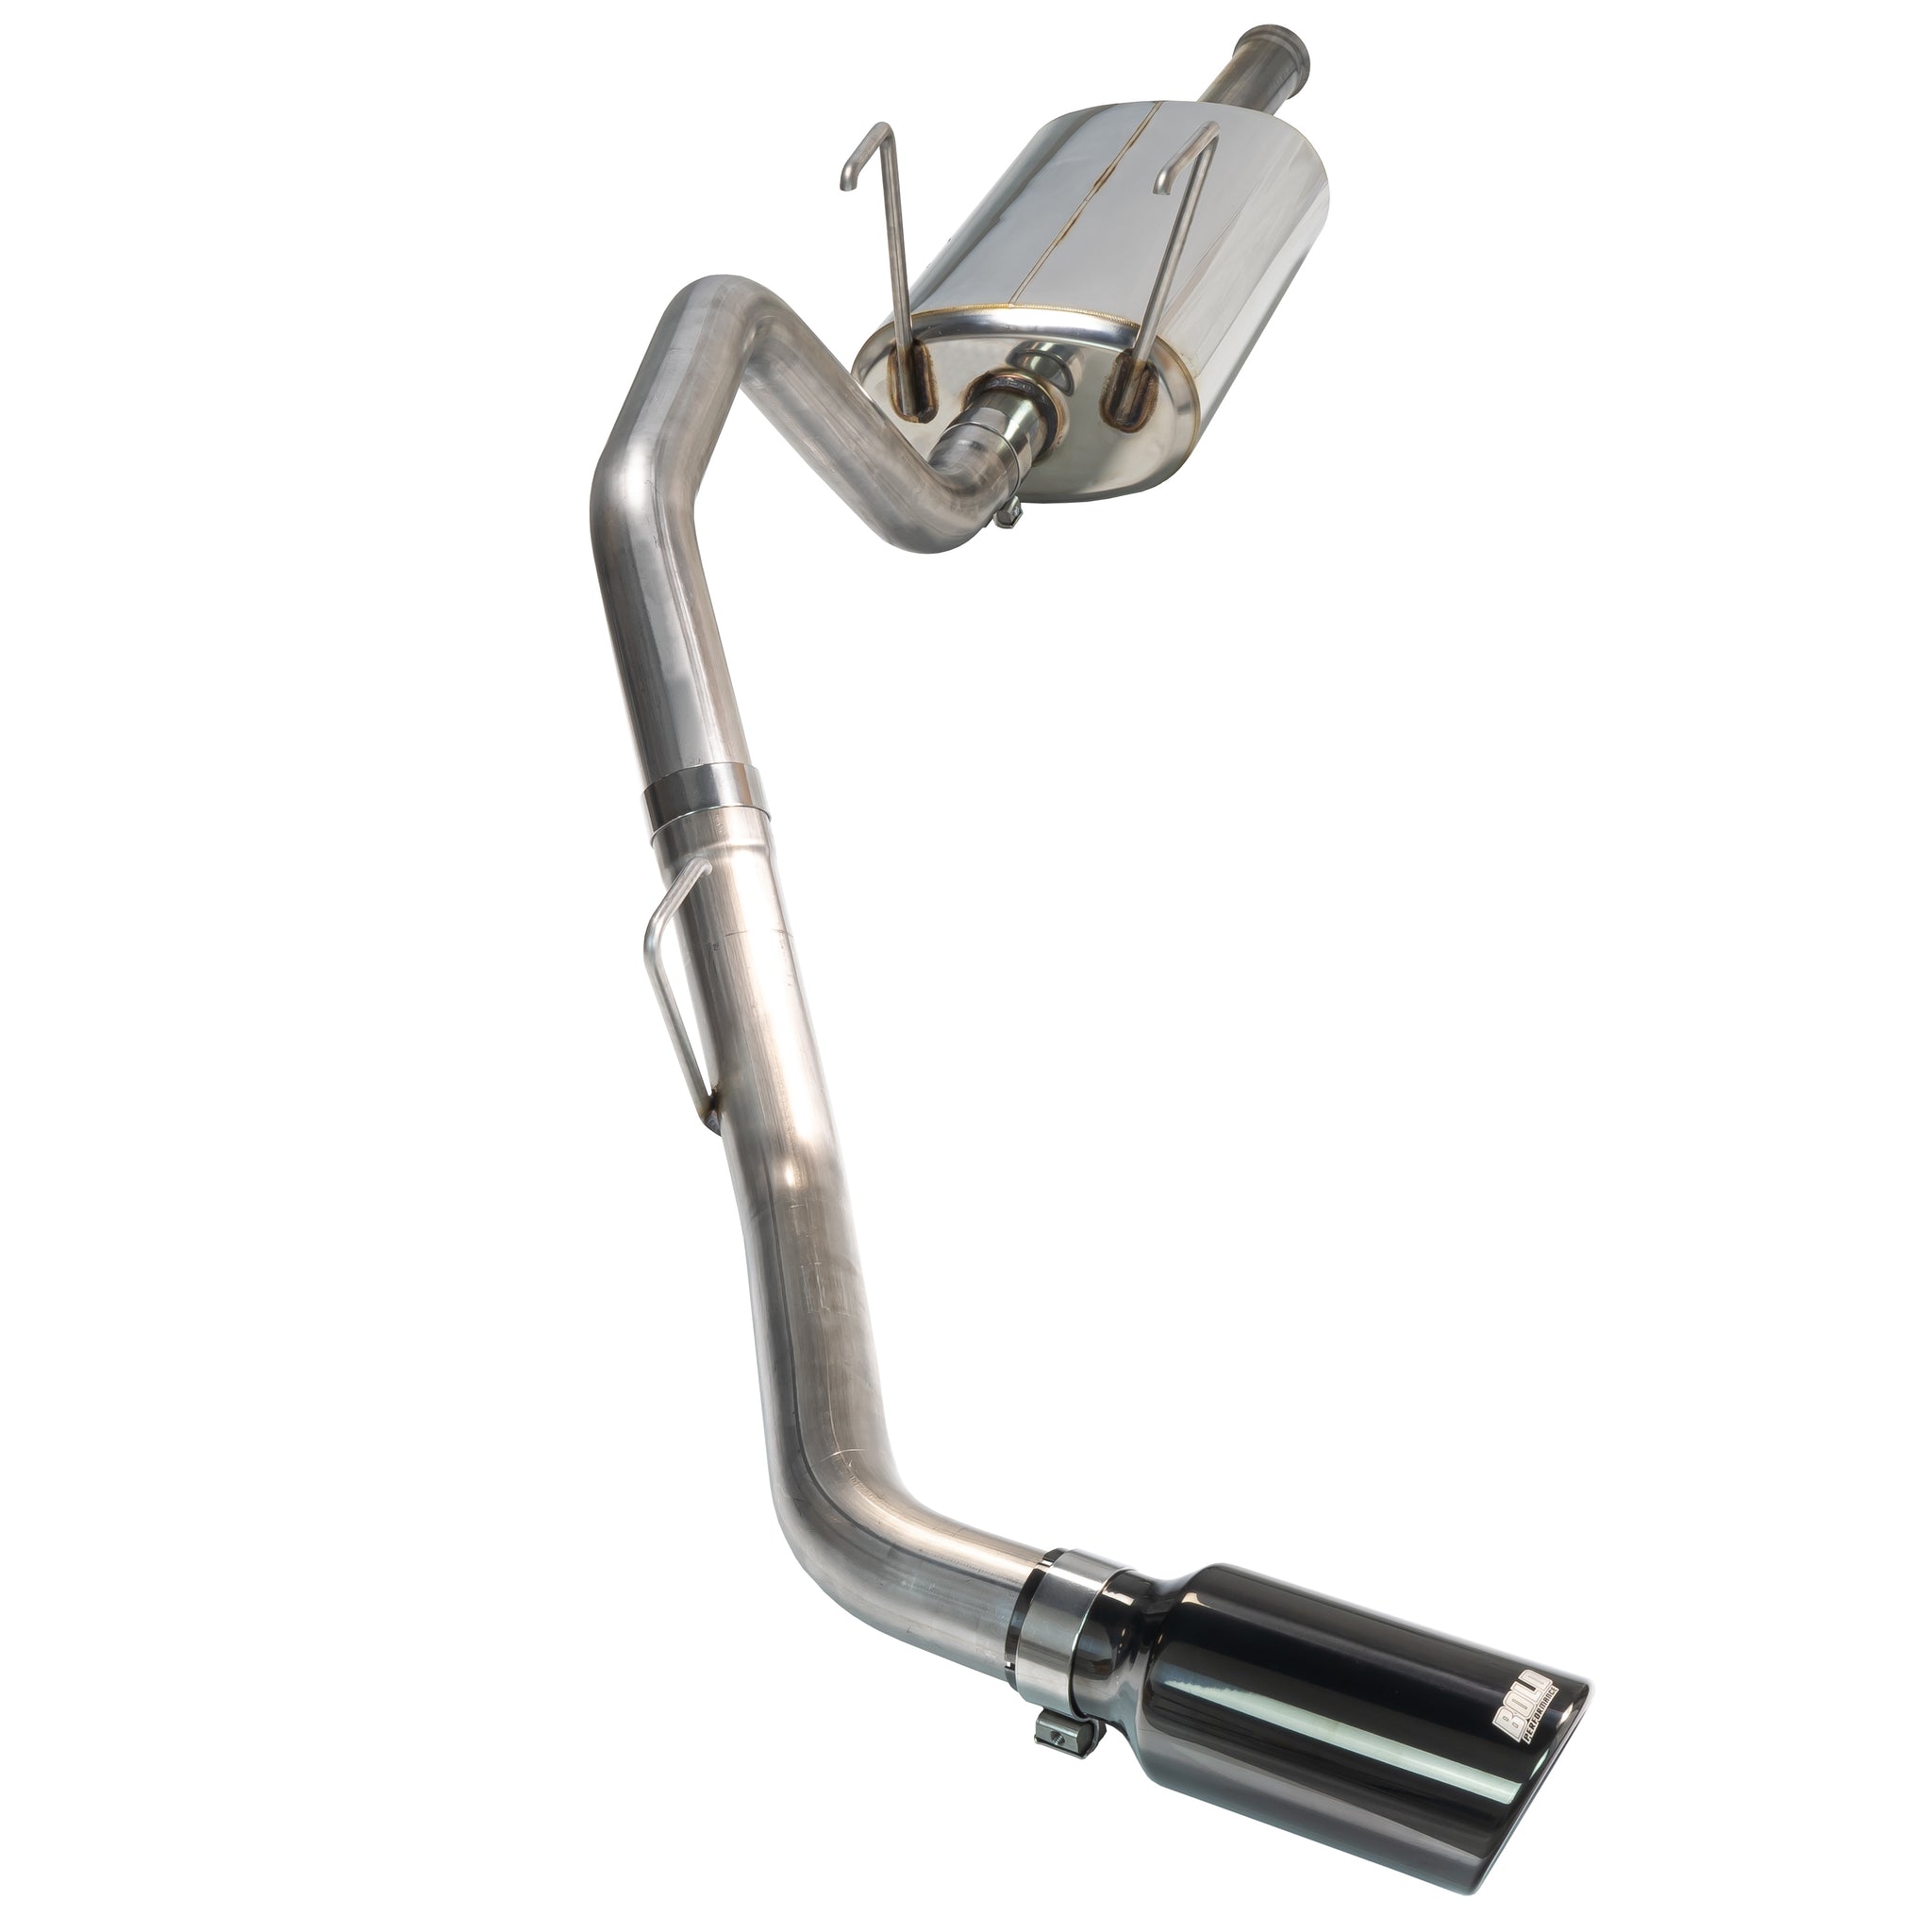 Toyota Tundra 2000-2006 V8 4.7L Side-Exit Cat-Back Exhaust System * IN